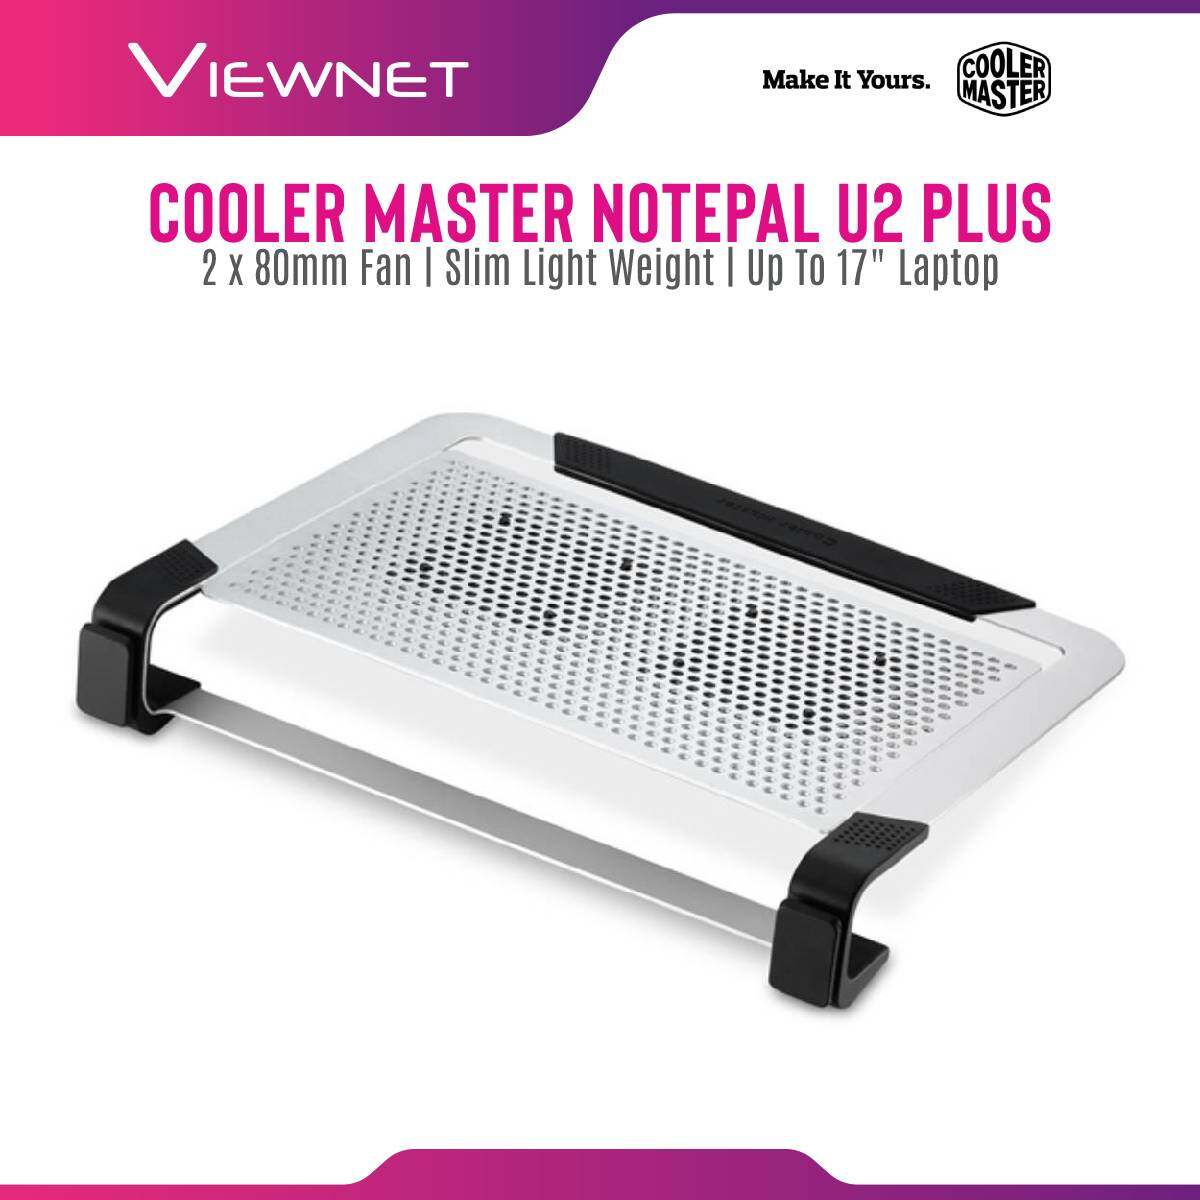 Cooler Master Notepal U2 PLUS 2 x 80mm Fan Slim Light Weight Portable Mesh USB 2.0 Notebook Cooler for up to 17